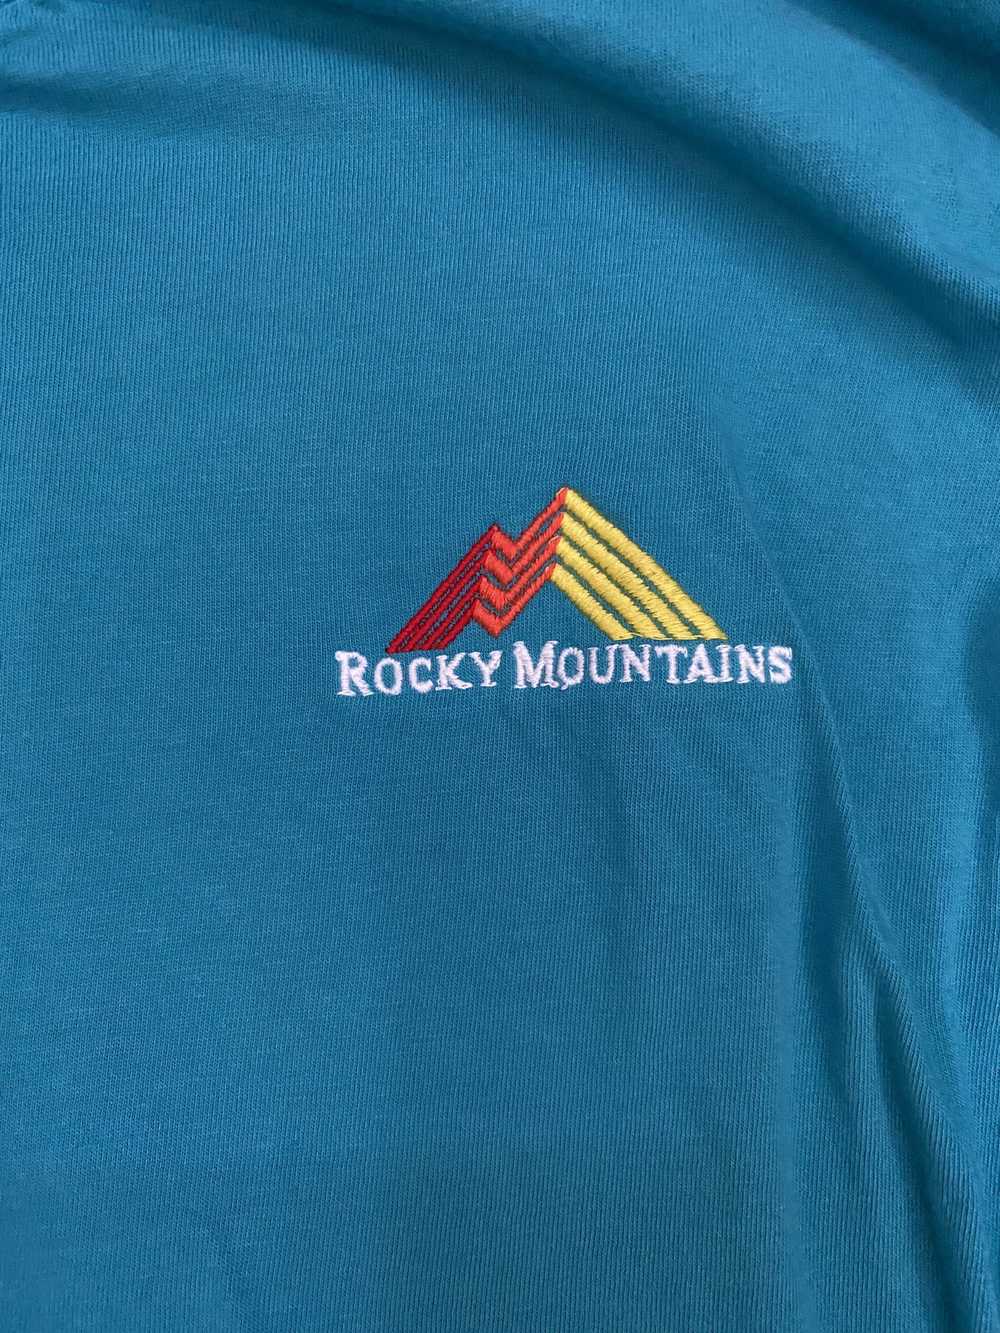 Pacsun Rocky Mountains Long Sleeve T-Shirt - image 2